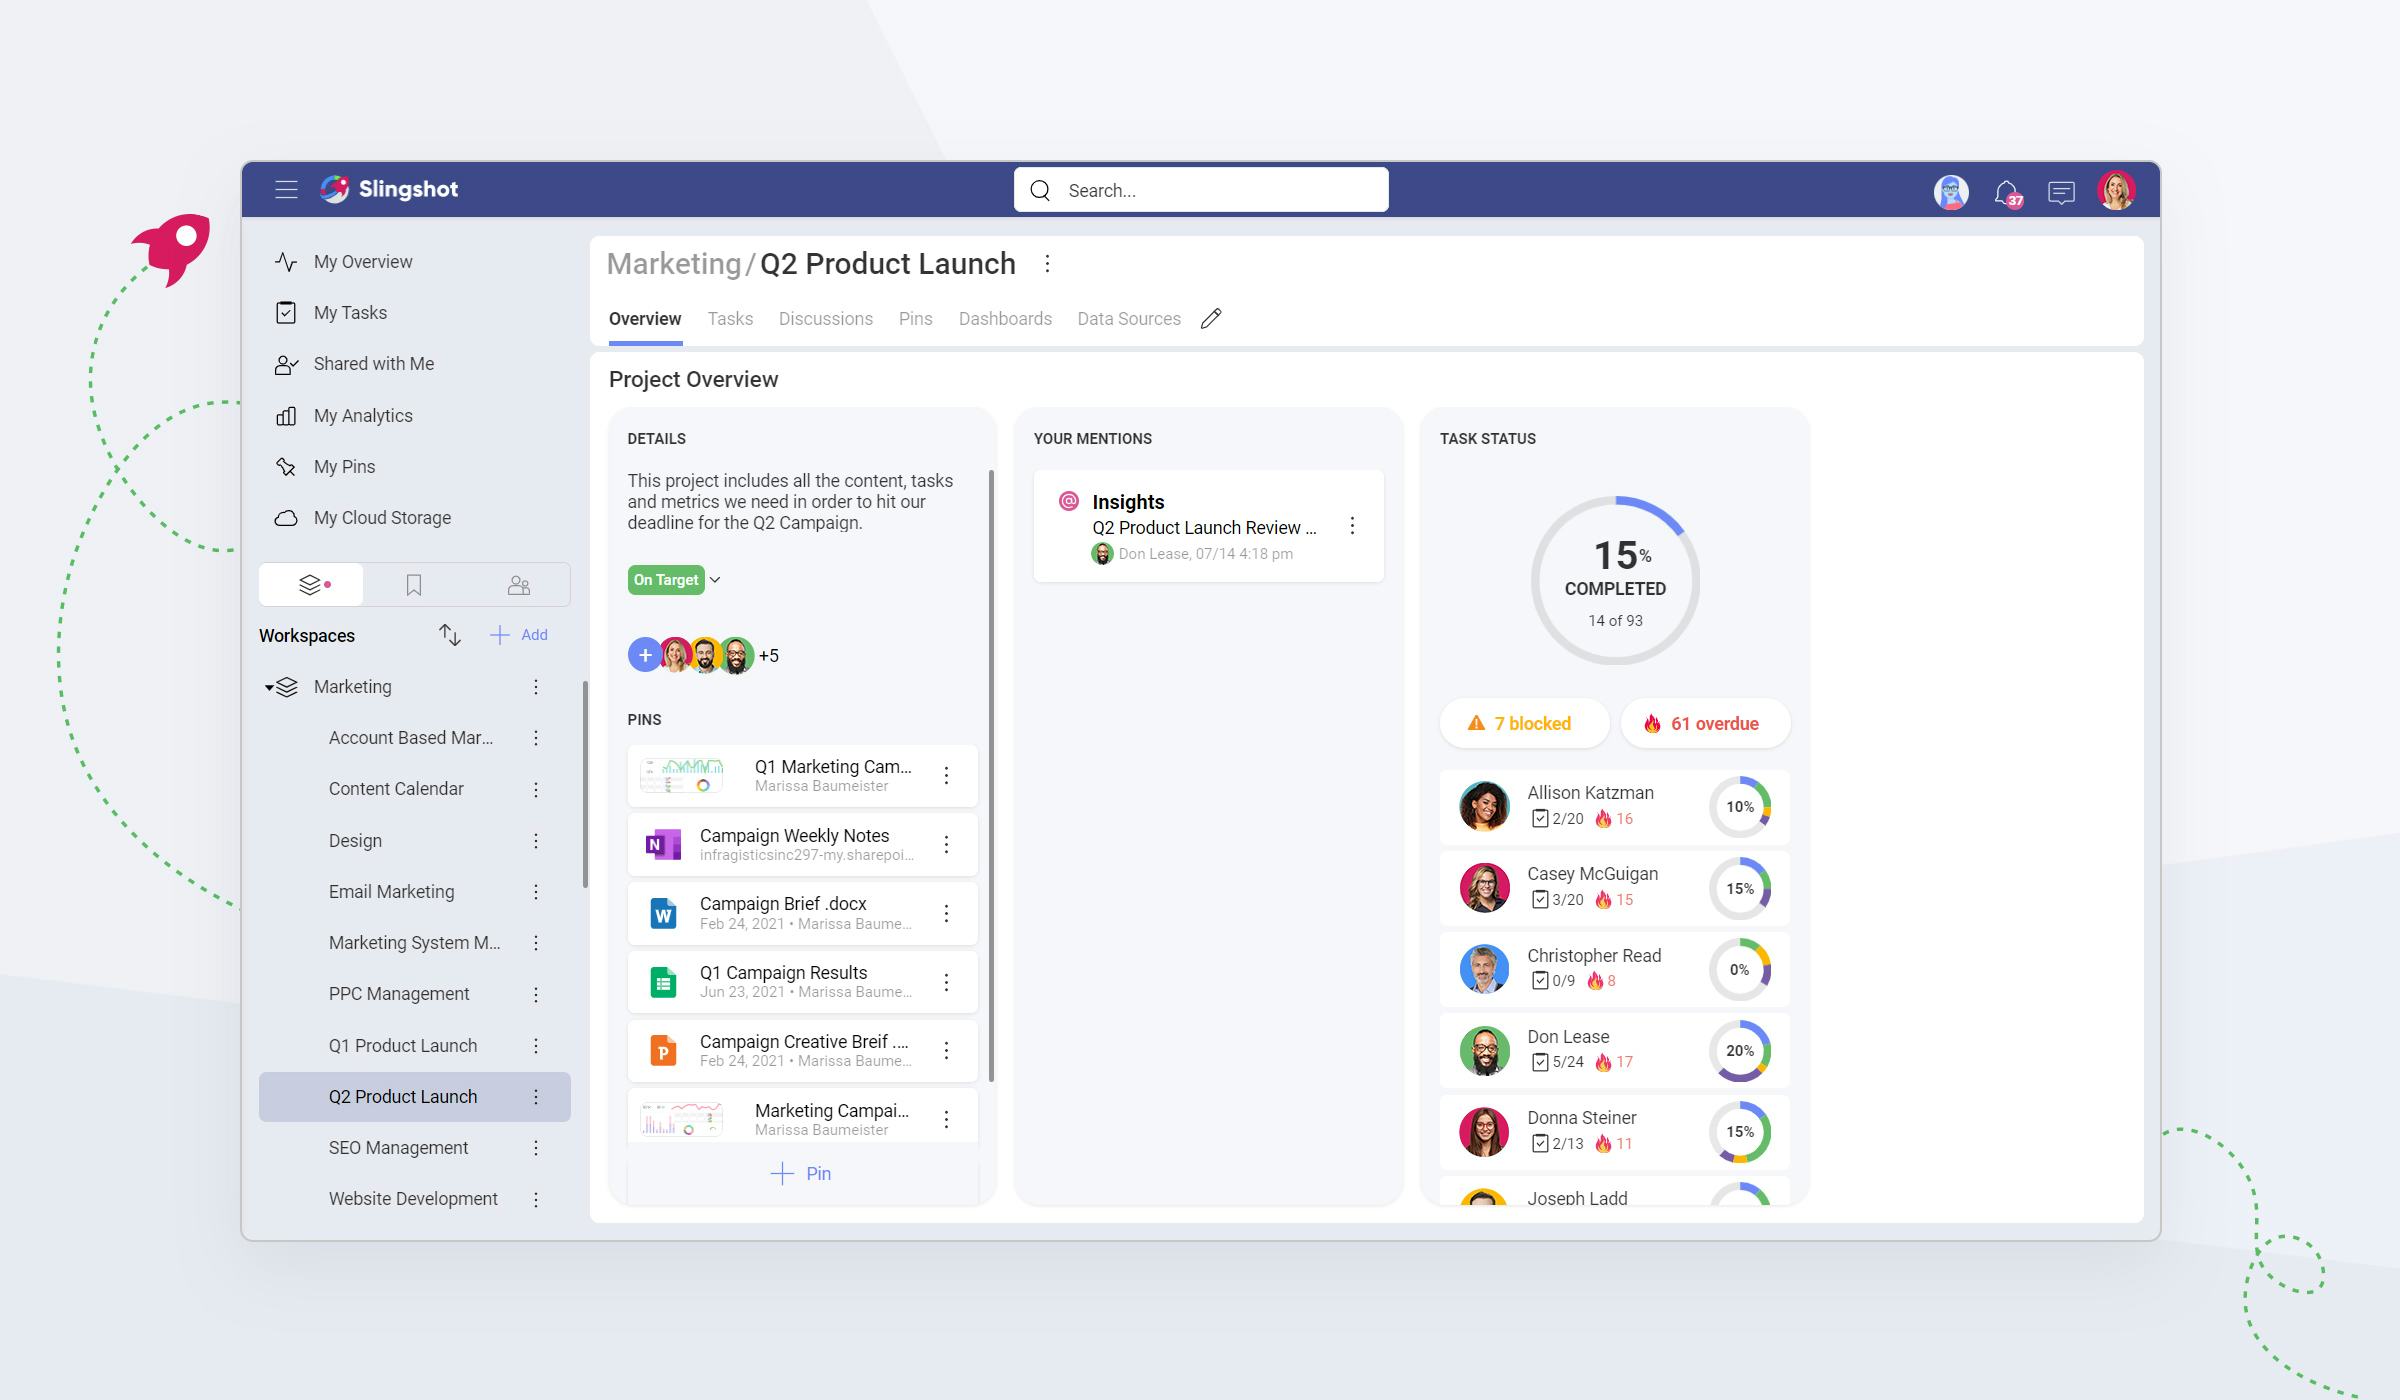 Slingshot Software - Keep track of everything from beginning to end with an easy-to-use solution that provides a digital workplace for all your team’s project management activities.